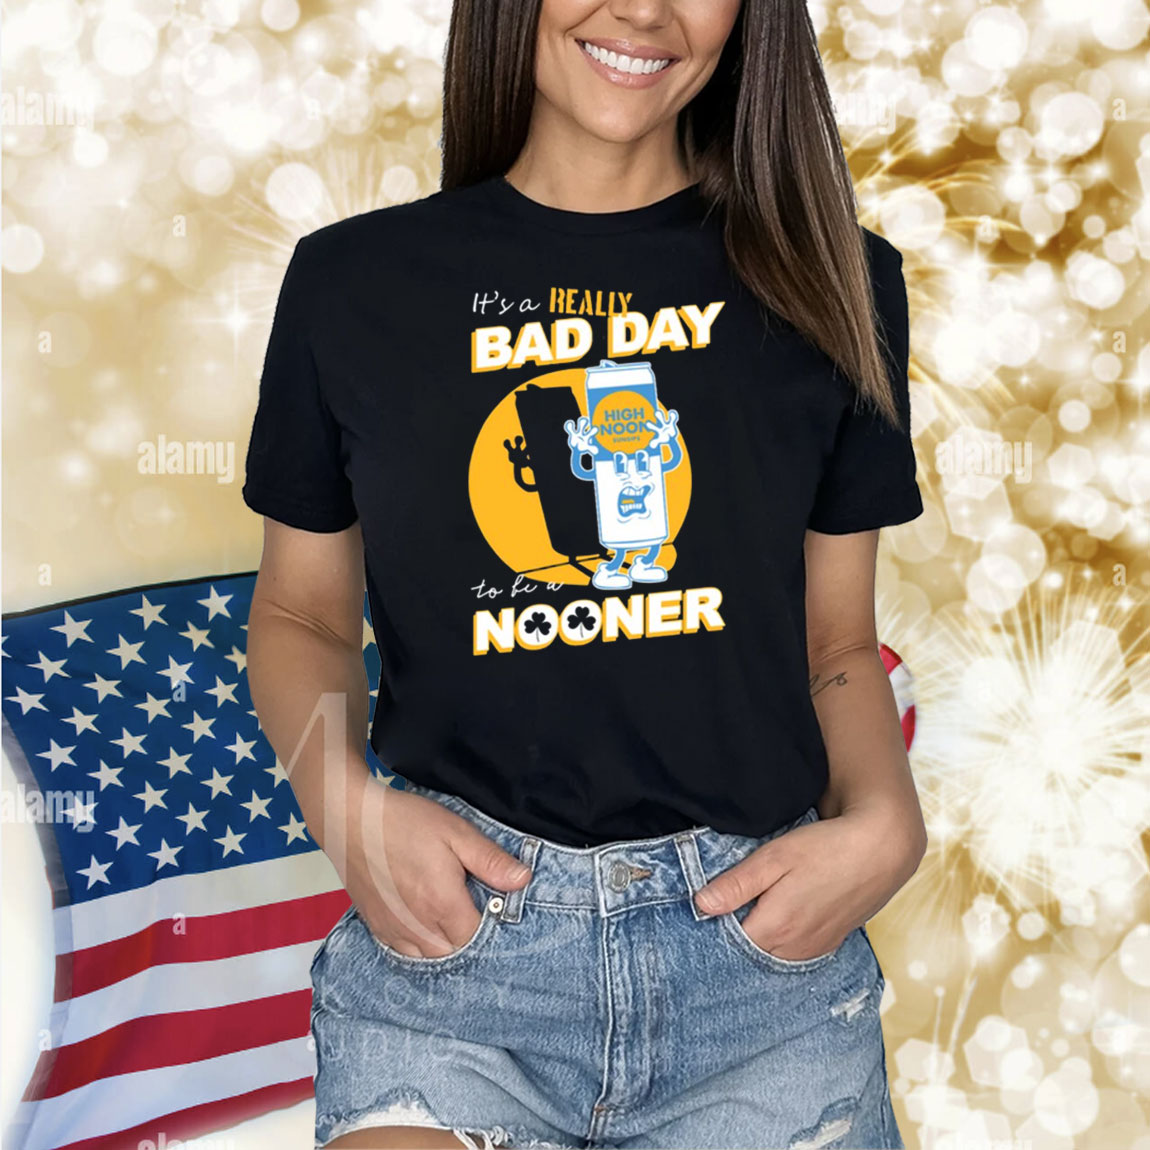 Bad Day To Be A Nooner Shirts